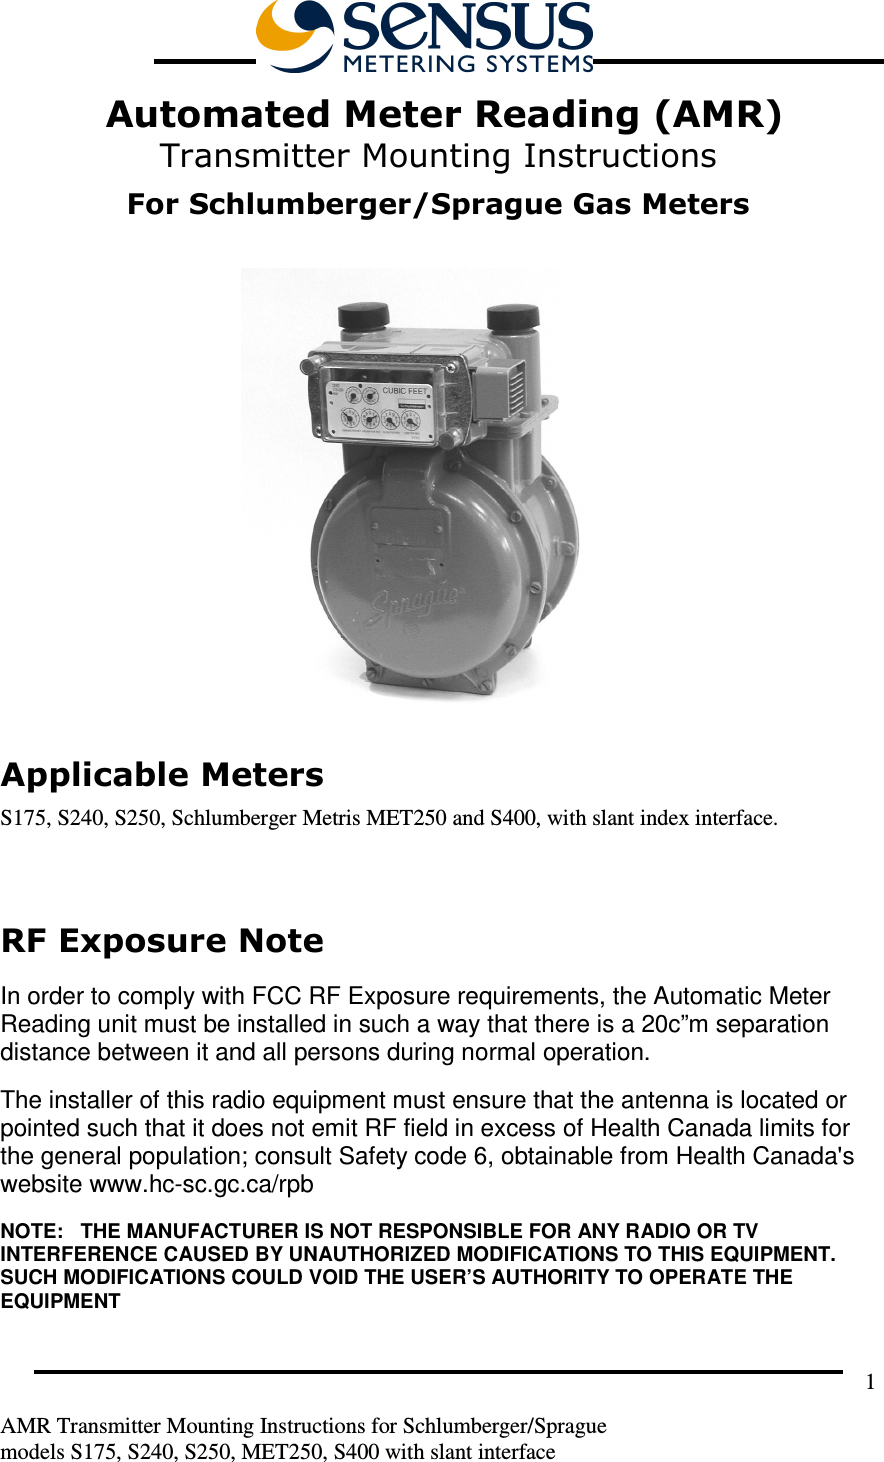         AMR Transmitter Mounting Instructions for Schlumberger/Sprague  models S175, S240, S250, MET250, S400 with slant interface 1  Automated Meter Reading (AMR) Transmitter Mounting Instructions  For Schlumberger/Sprague Gas Meters   Applicable Meters S175, S240, S250, Schlumberger Metris MET250 and S400, with slant index interface.  RF Exposure Note  In order to comply with FCC RF Exposure requirements, the Automatic Meter Reading unit must be installed in such a way that there is a 20c”m separation distance between it and all persons during normal operation. The installer of this radio equipment must ensure that the antenna is located or pointed such that it does not emit RF field in excess of Health Canada limits for the general population; consult Safety code 6, obtainable from Health Canada&apos;s website www.hc-sc.gc.ca/rpb NOTE:   THE MANUFACTURER IS NOT RESPONSIBLE FOR ANY RADIO OR TV INTERFERENCE CAUSED BY UNAUTHORIZED MODIFICATIONS TO THIS EQUIPMENT.  SUCH MODIFICATIONS COULD VOID THE USER’S AUTHORITY TO OPERATE THE EQUIPMENT  